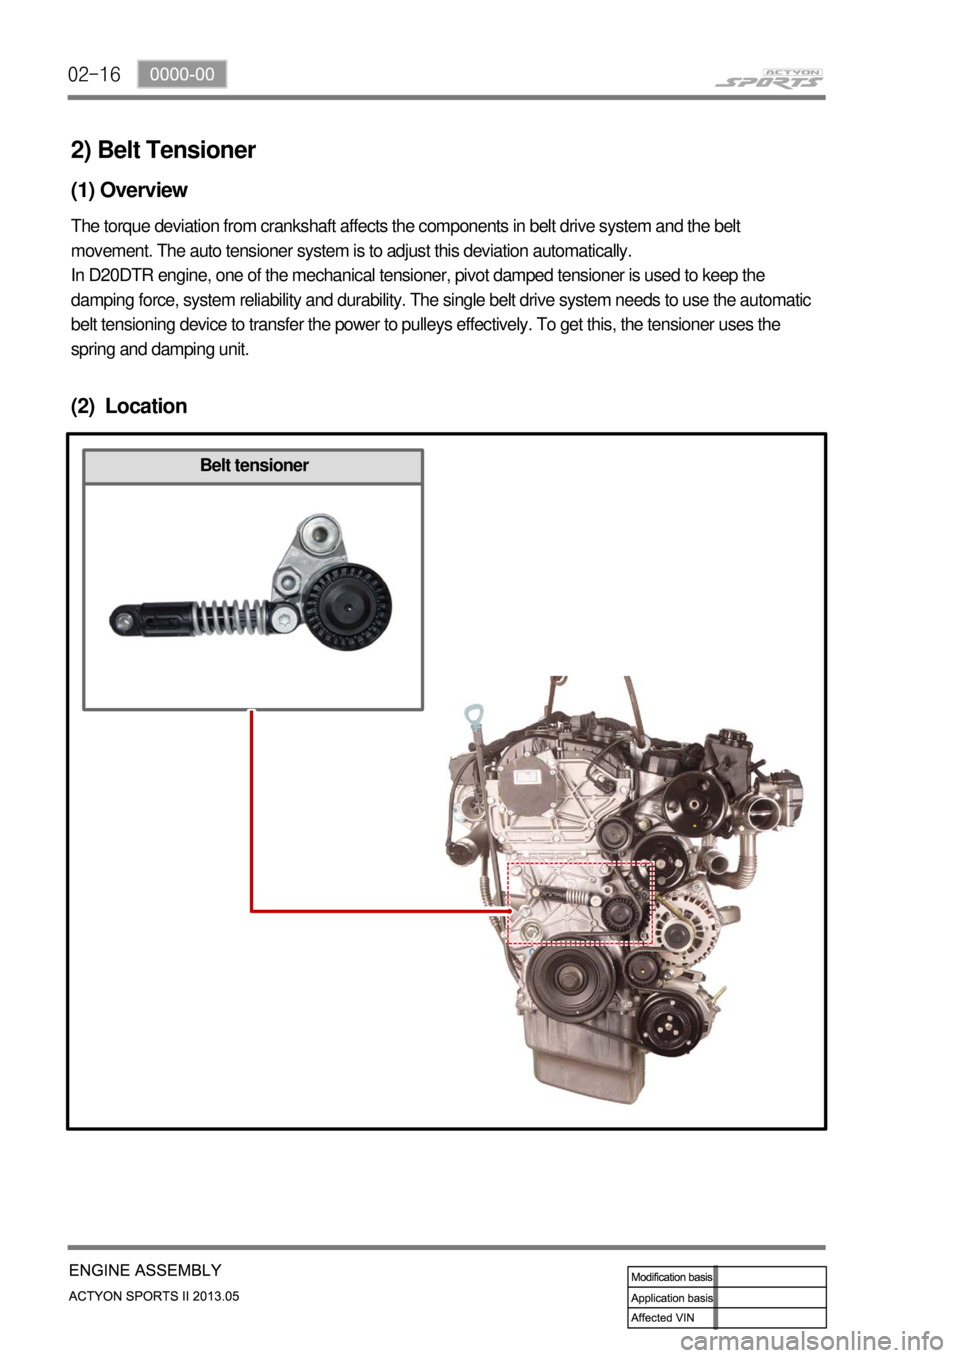 SSANGYONG NEW ACTYON SPORTS 2013 Workshop Manual 02-16
2) Belt Tensioner
(1) Overview
The torque deviation from crankshaft affects the components in belt drive system and the belt 
movement. The auto tensioner system is to adjust this deviation auto